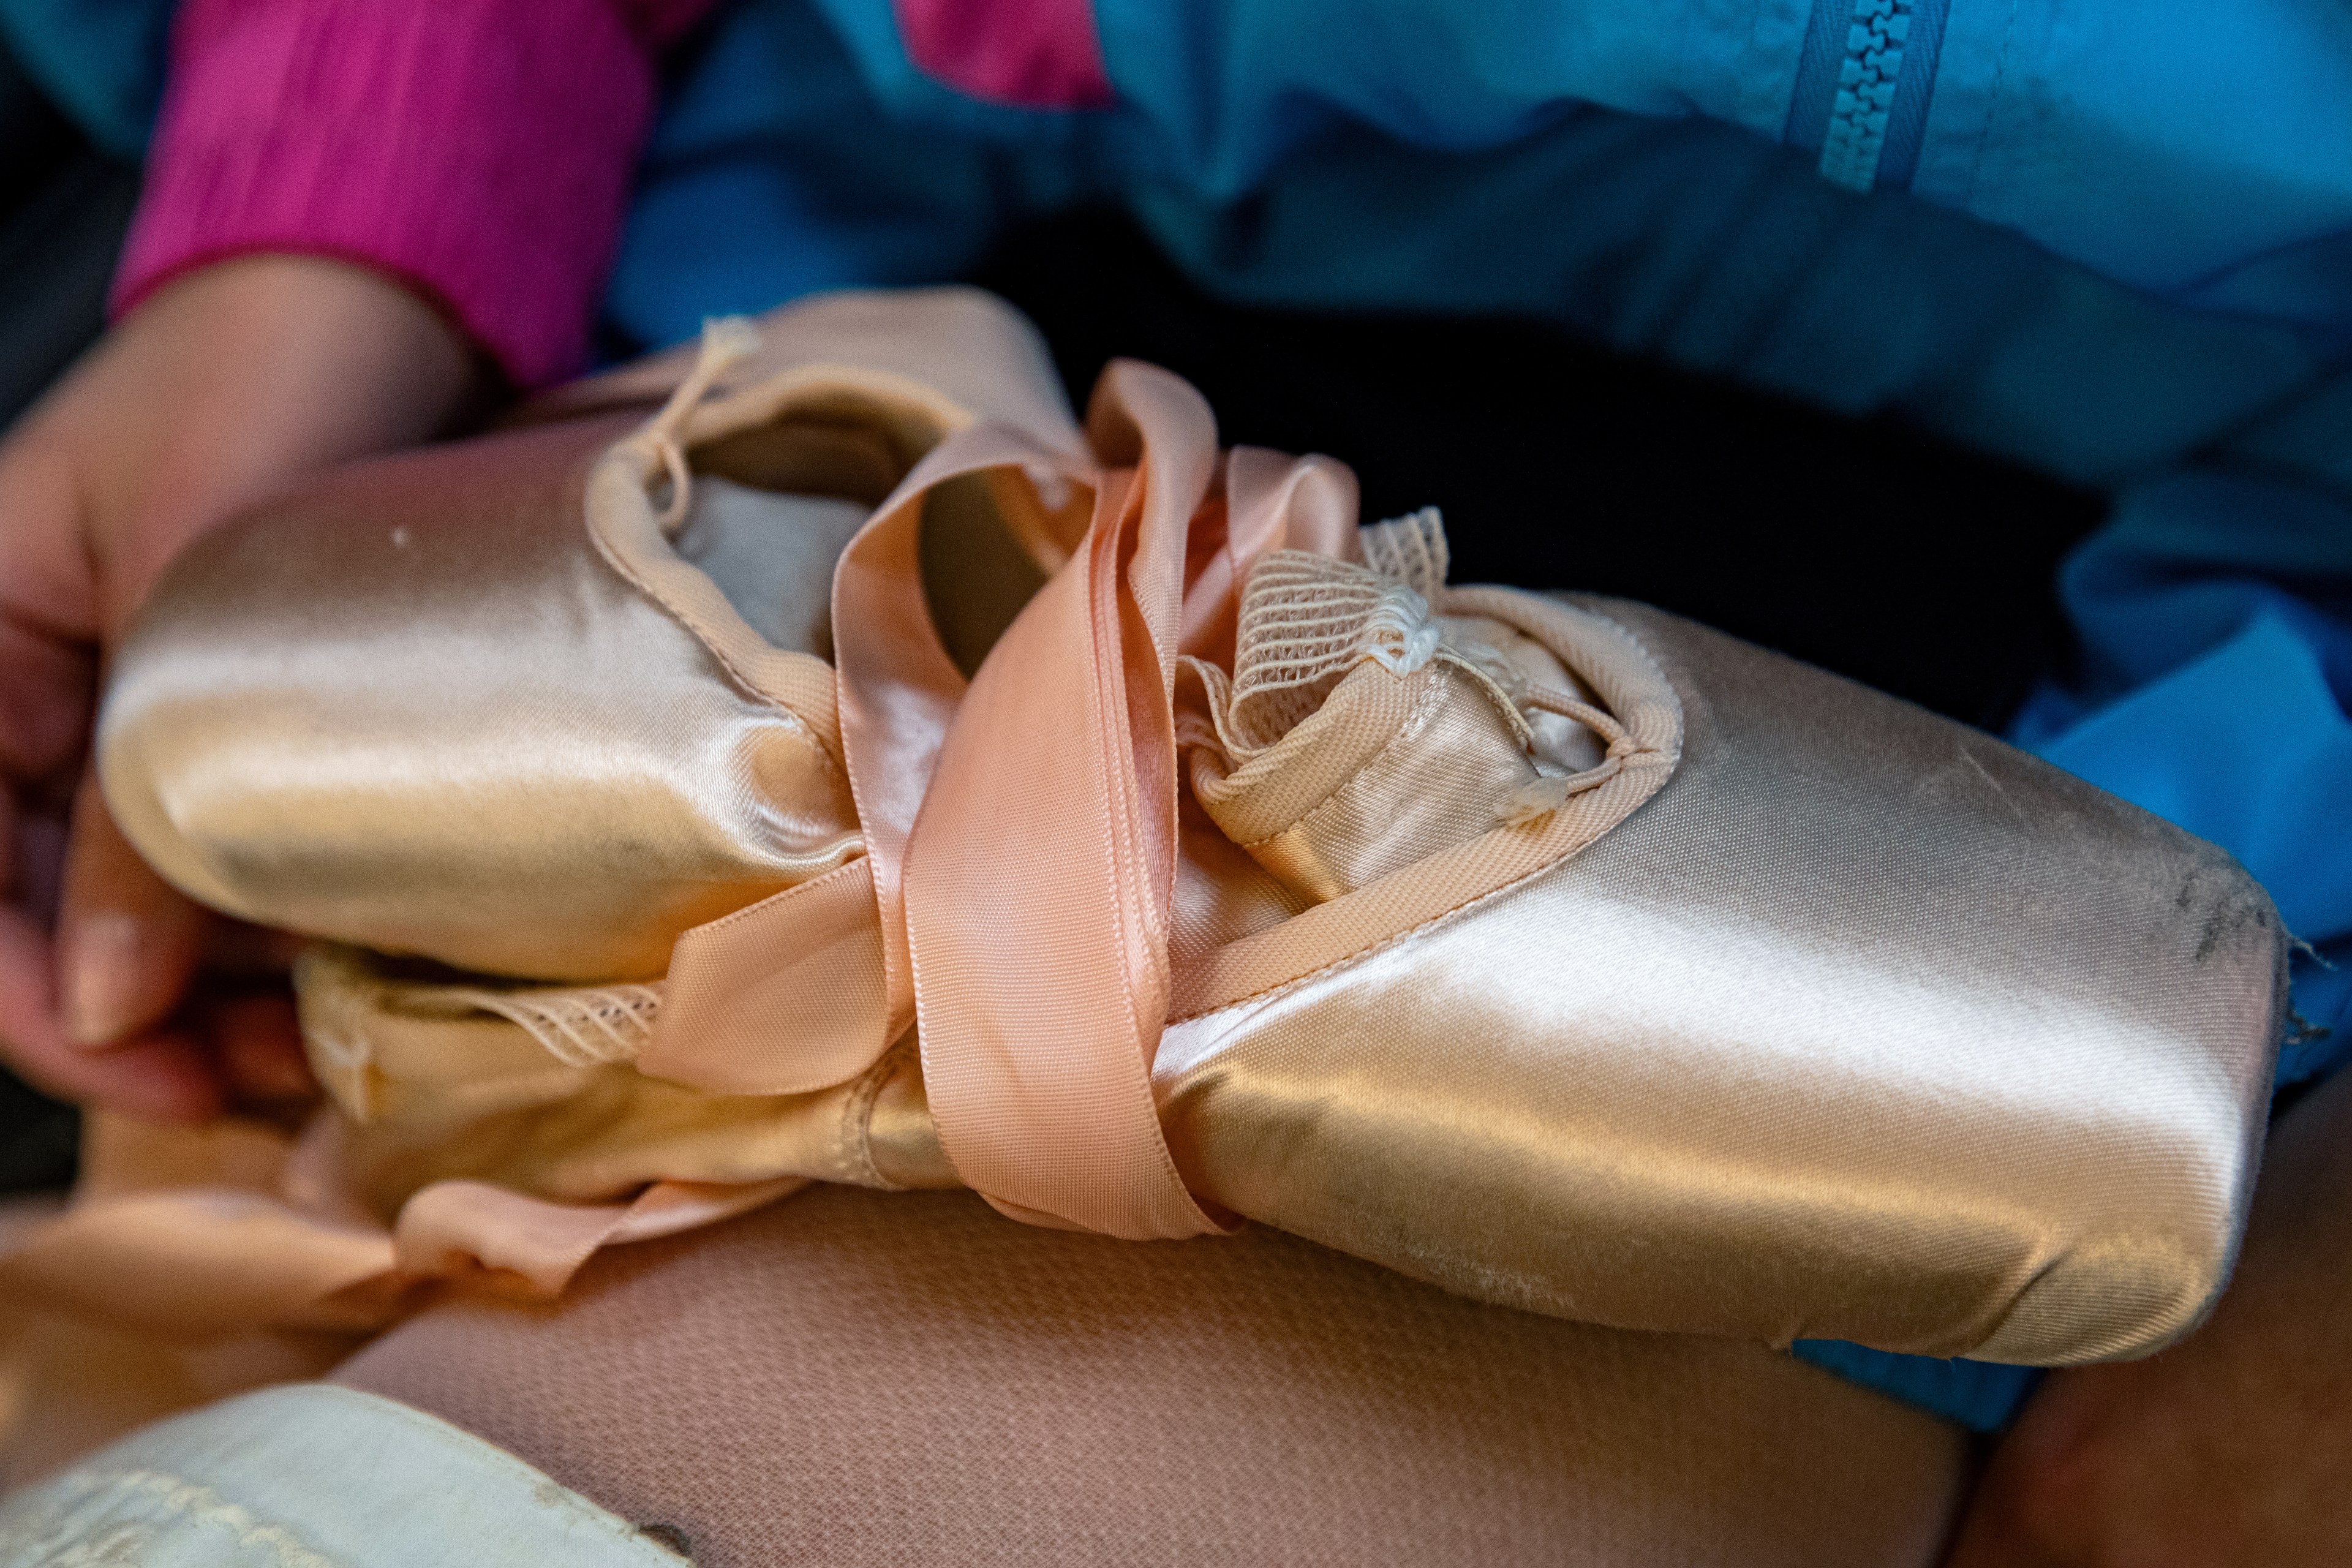 A detail photo of pointe shoes.